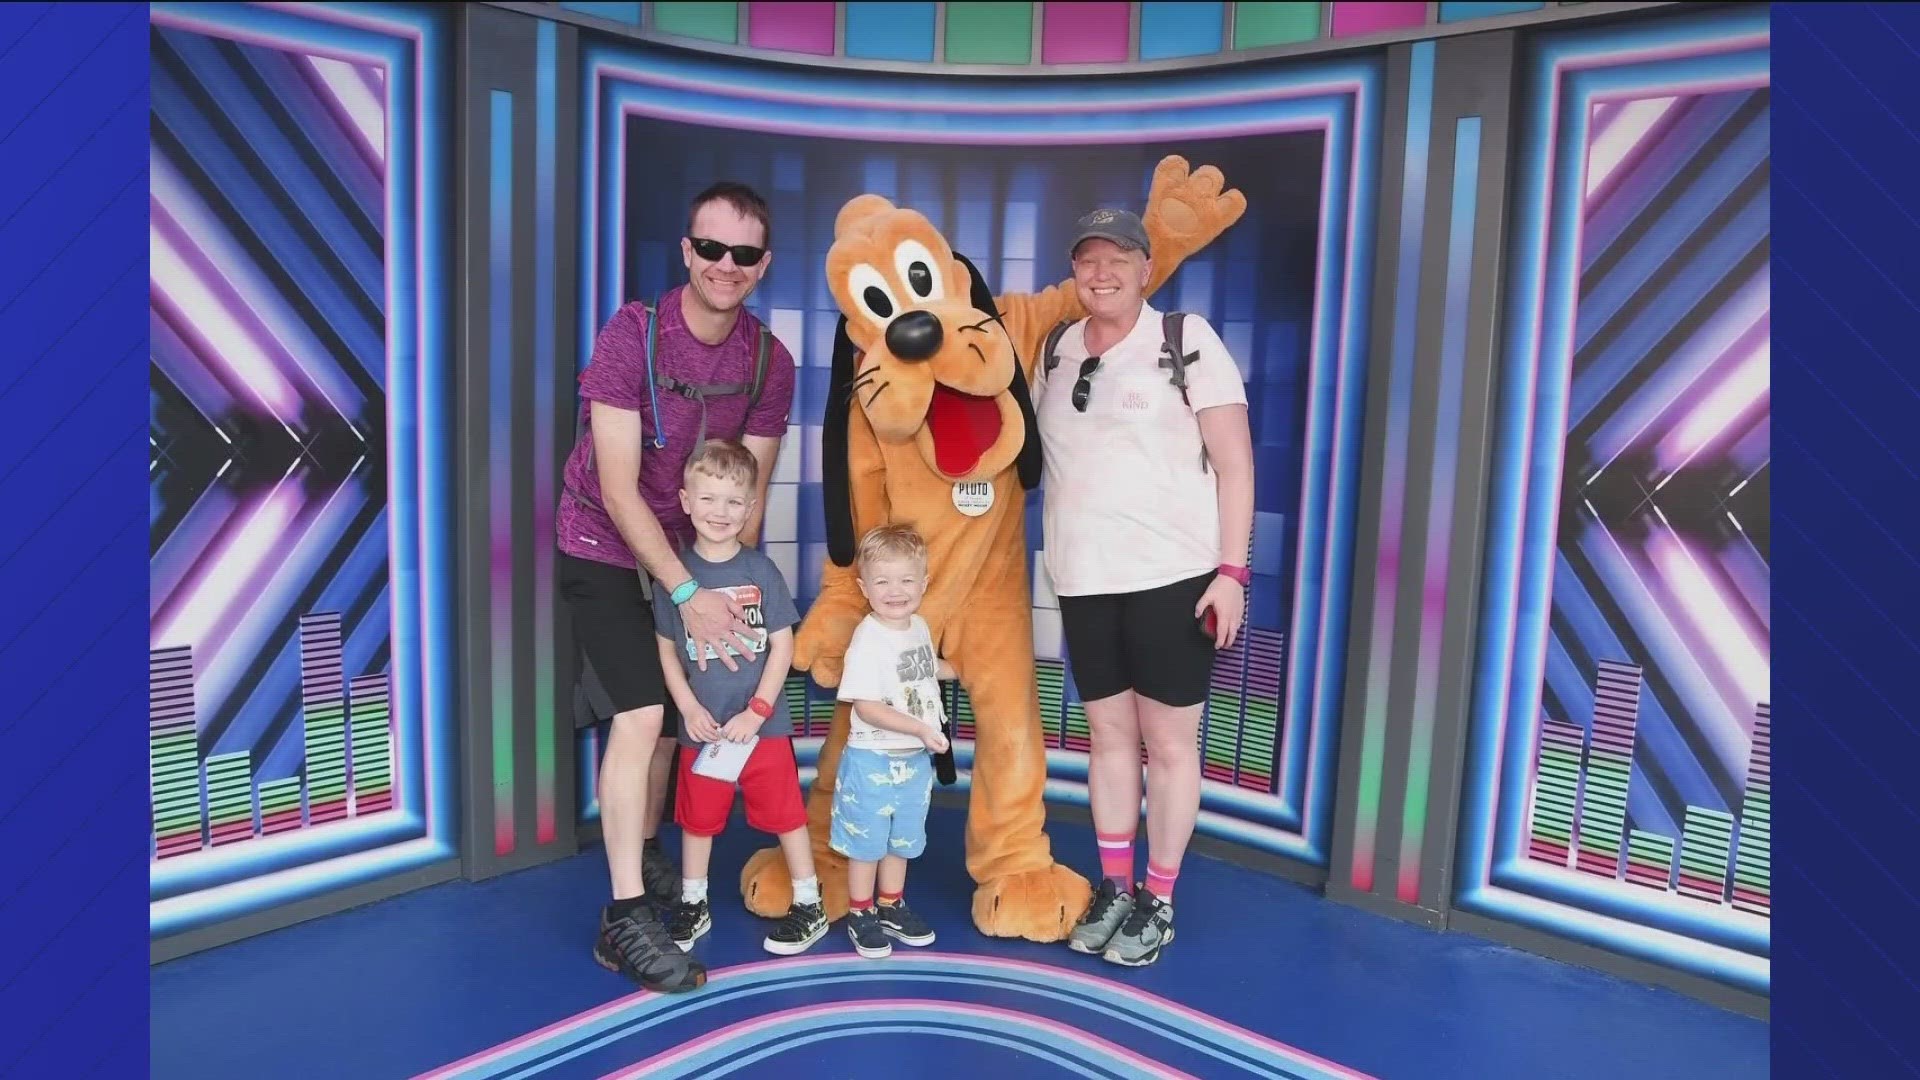 Jenny Giese, 39, is battling metastatic breast cancer. She and her family went to Disney World after family, friends, and even strangers donated to the trip.